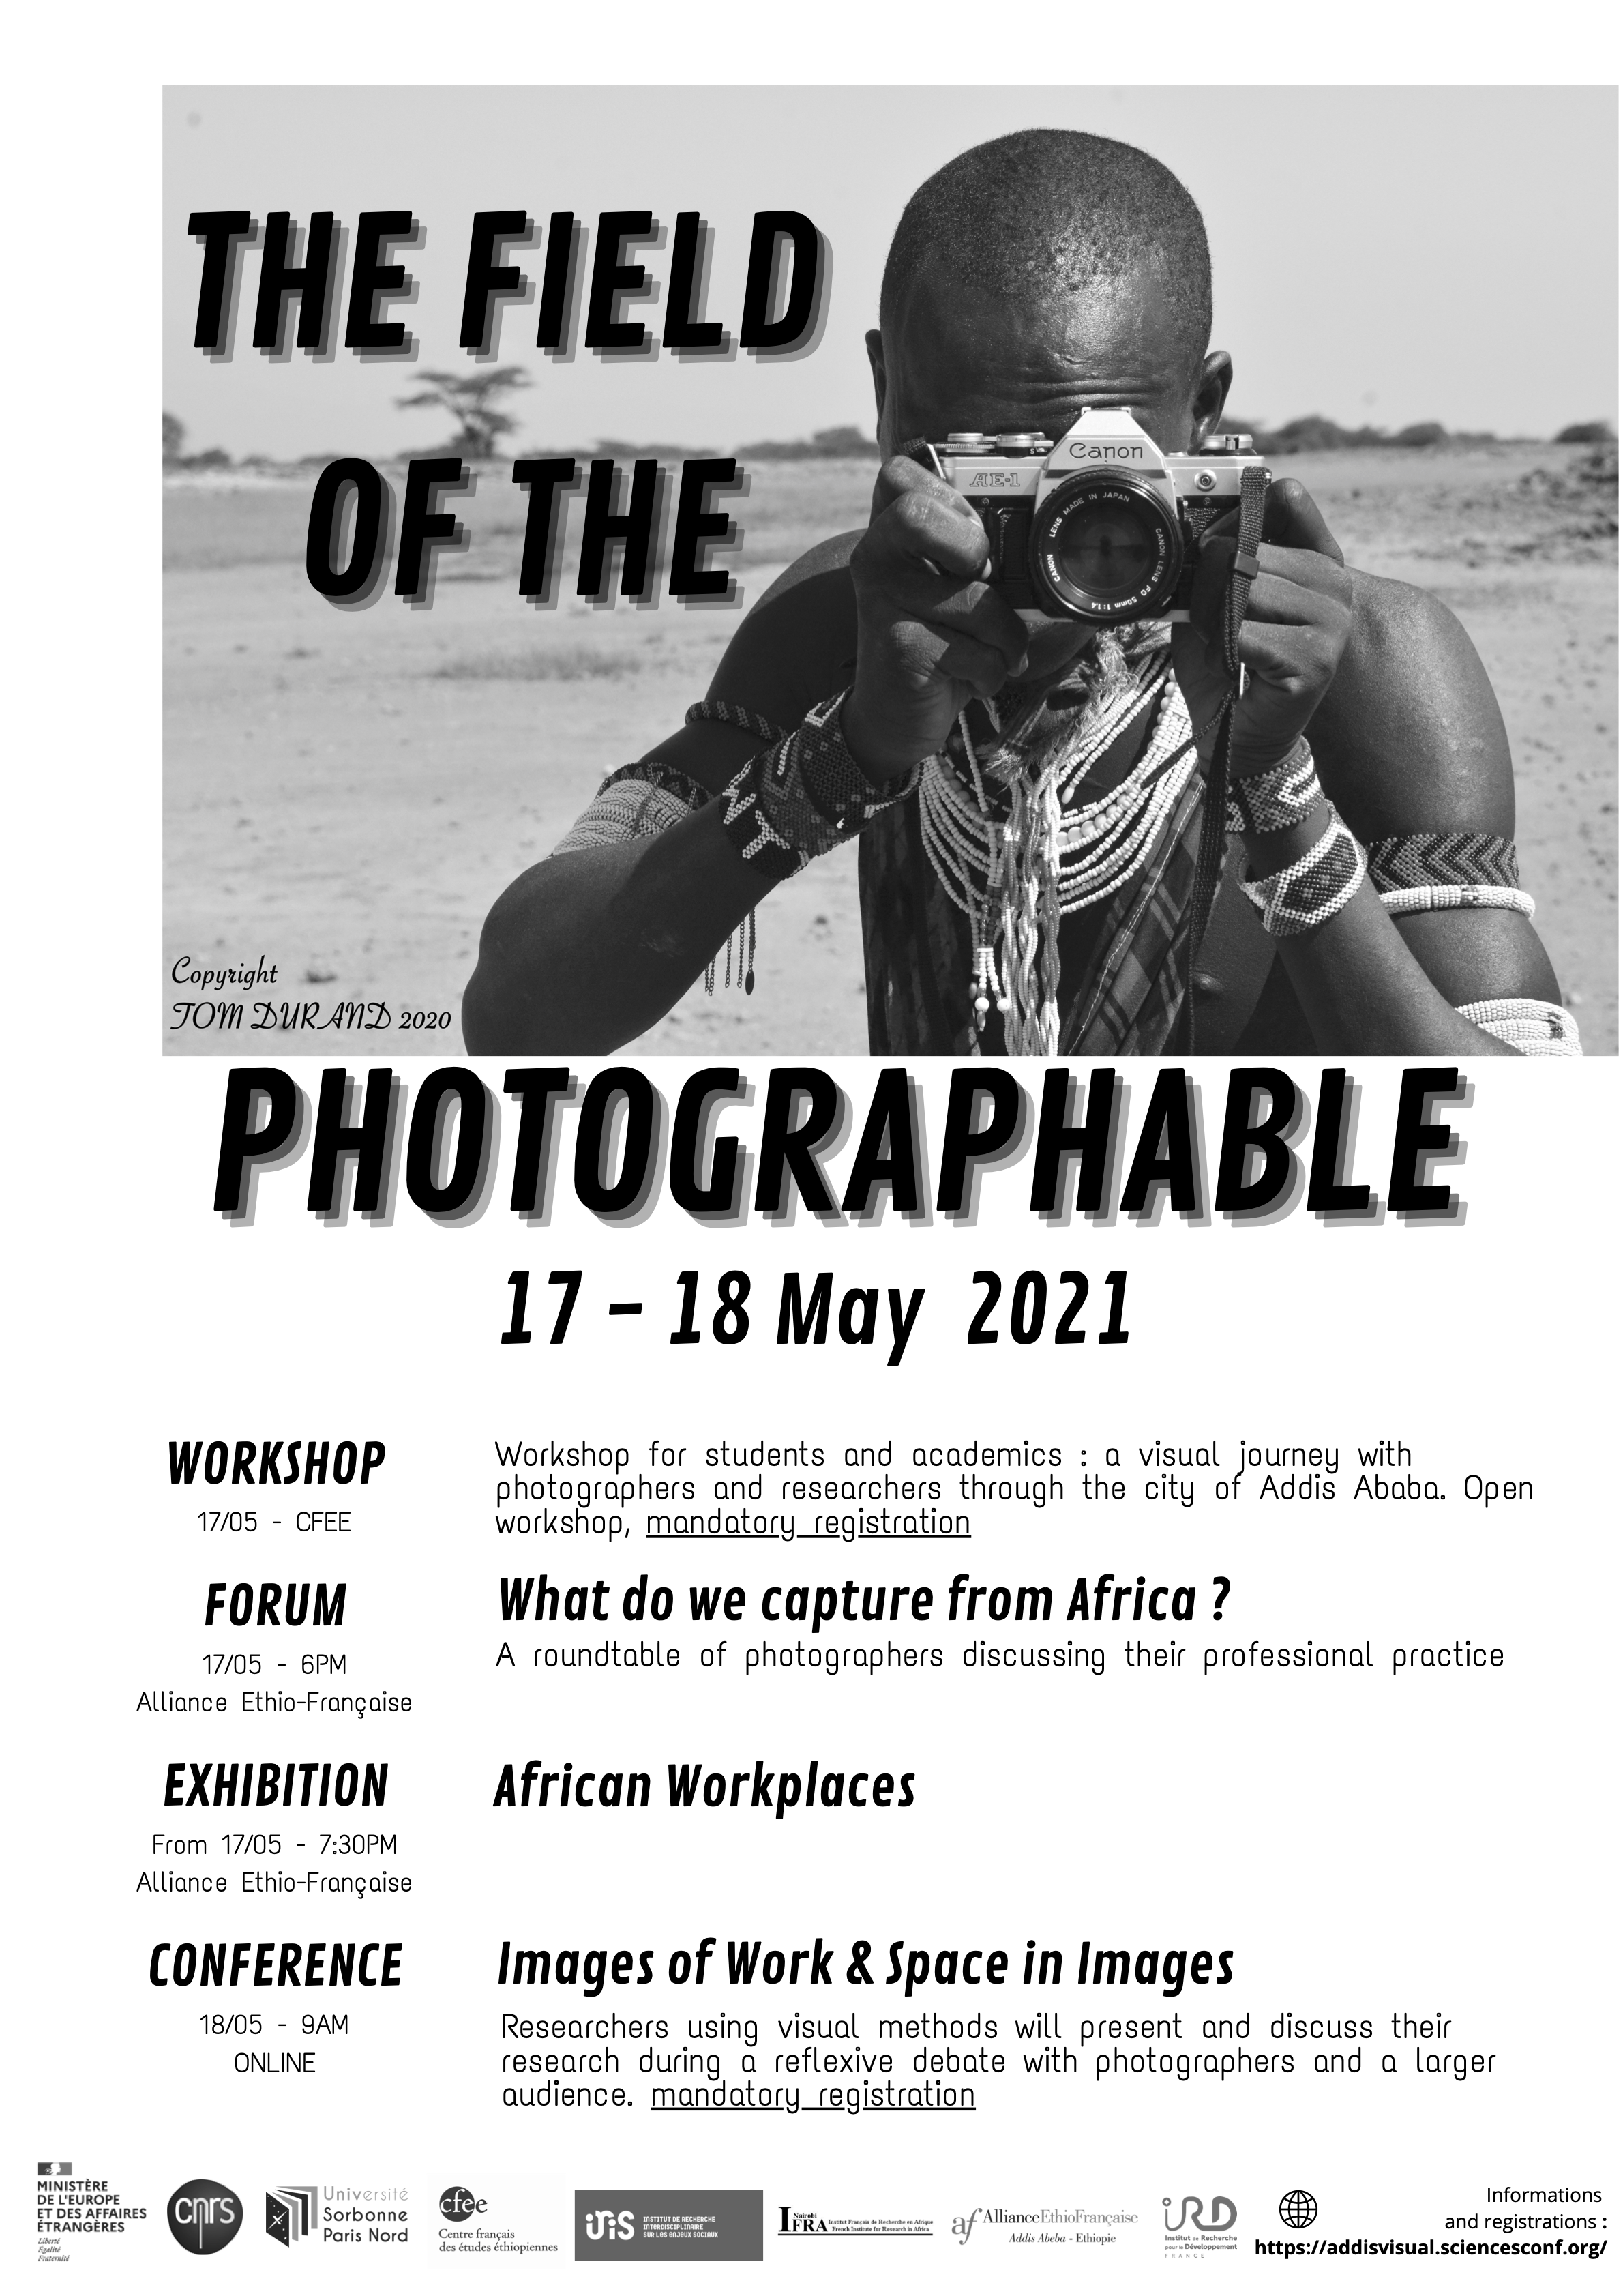 The Field of the ‘Photographable’: From the Global North to the Global South and from the Global South to the Global North - 17 et 18 mai